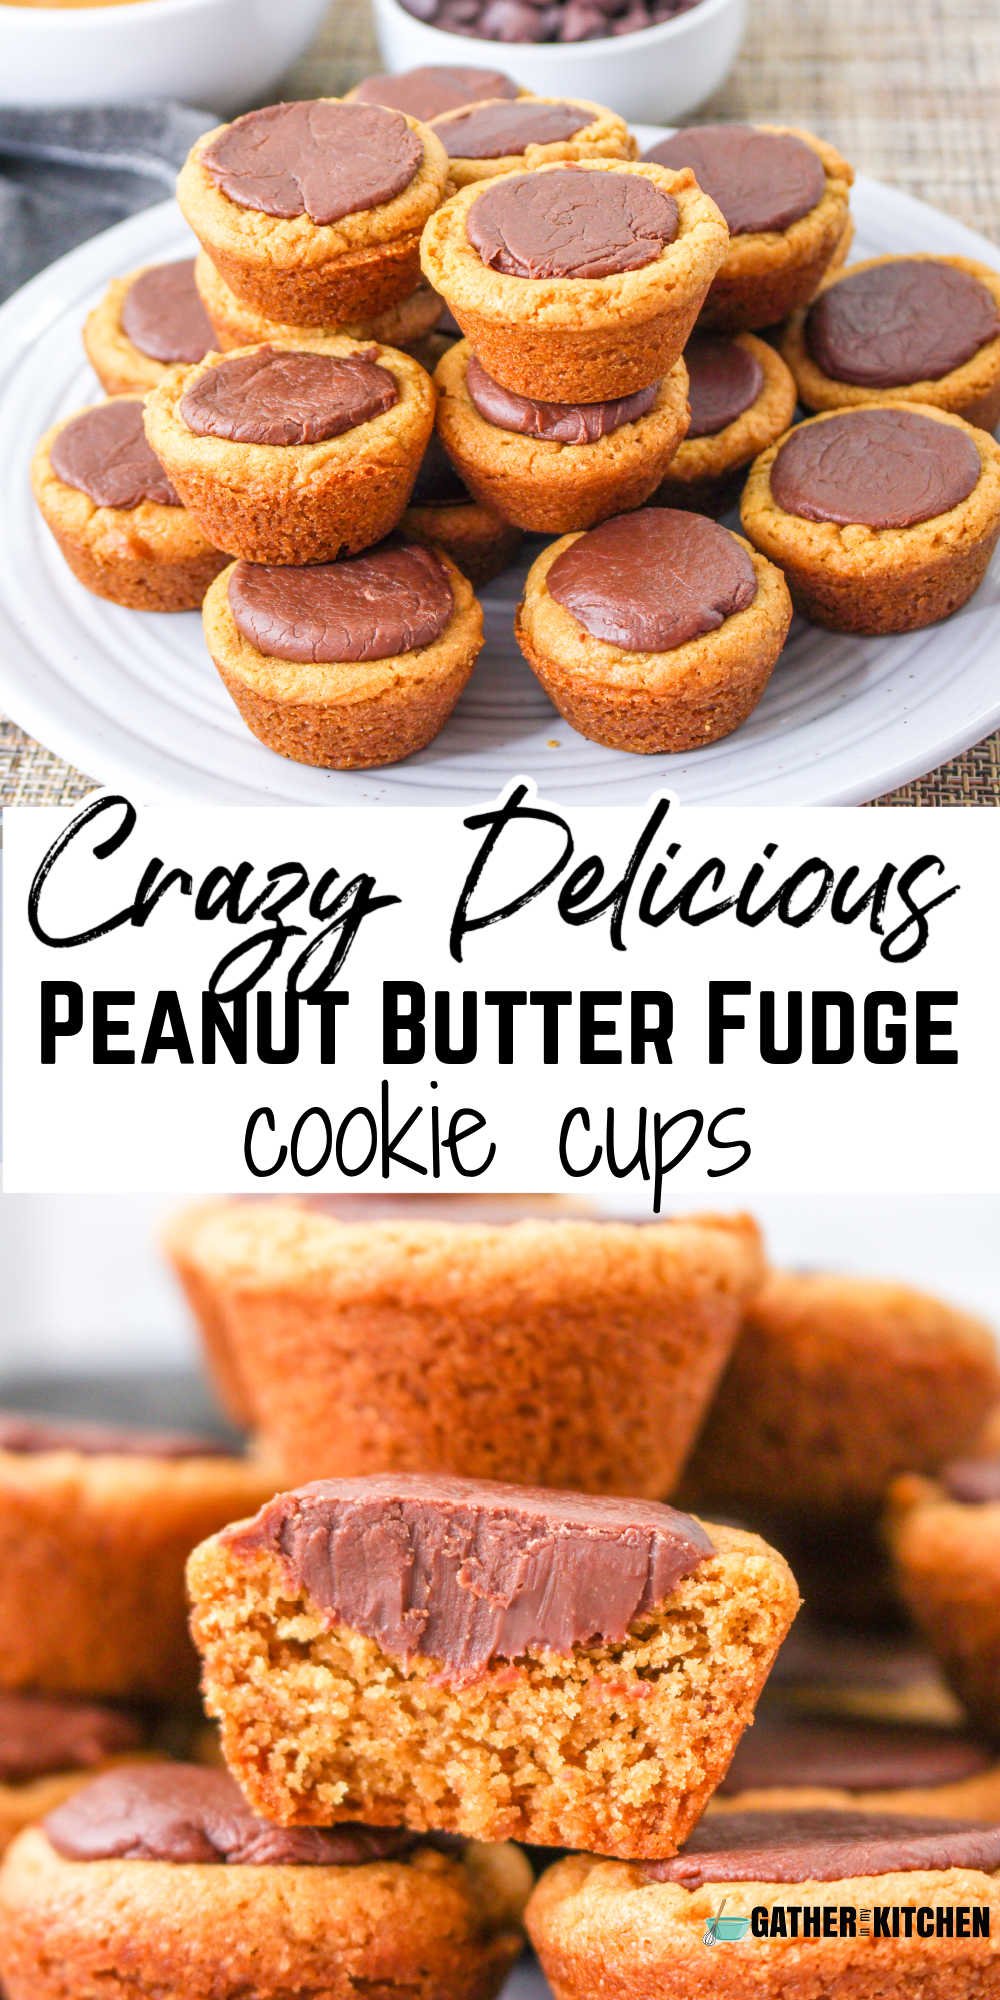 Pin image: top has a plate of peanut butter fudge cookie cups, middle says "Crazy Delicious Peanut Butter Fudge Cookie Cups" and bottom is a closeup of a pile of peanut butter fudge cookie cups with the focus on one with a bite taken out of it.